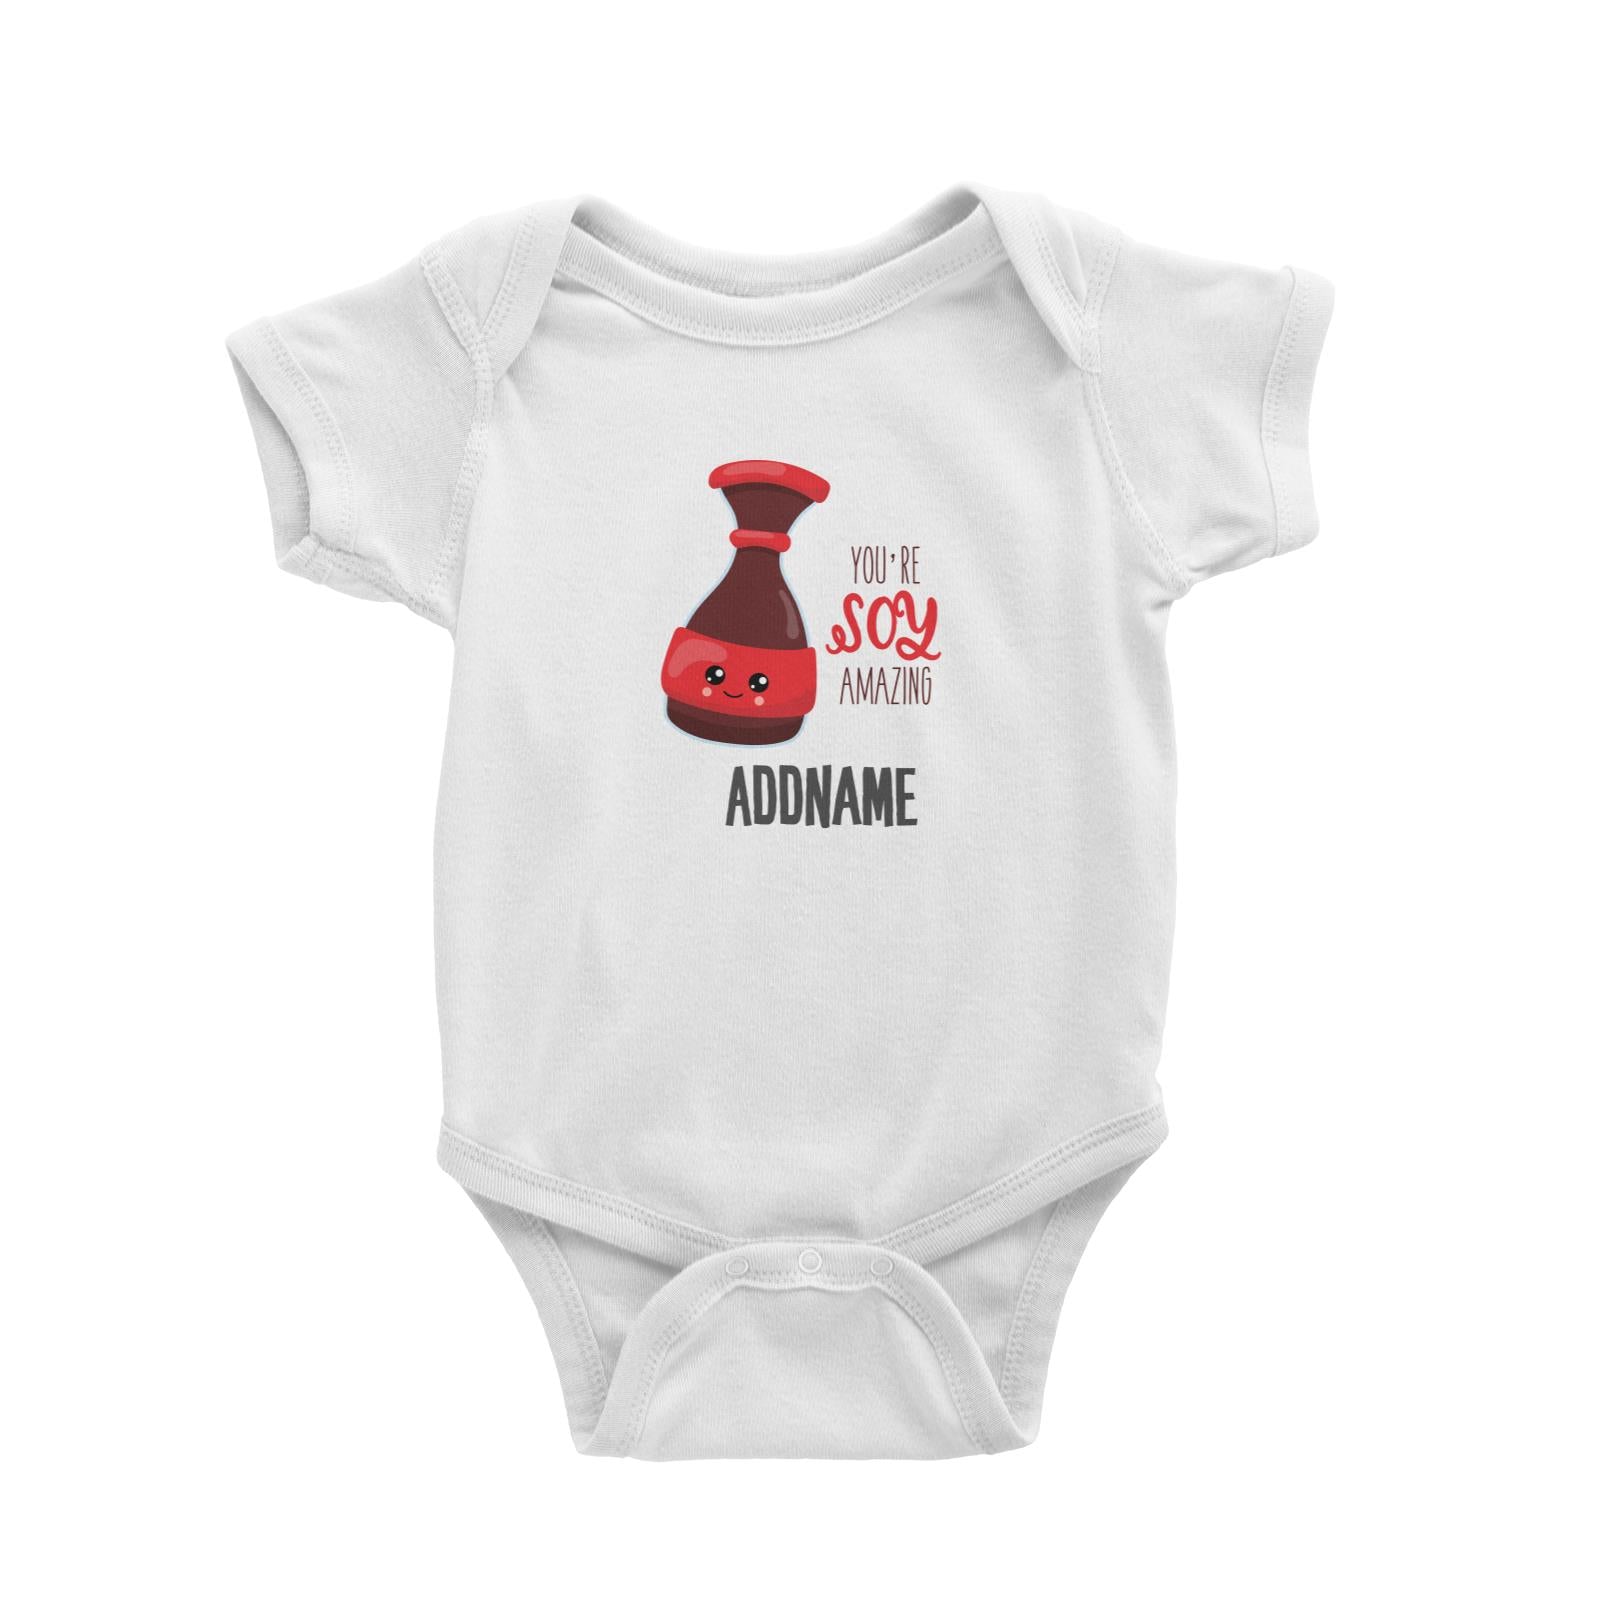 You're Soy Amazing Soy Sauce Addname White Baby Romper